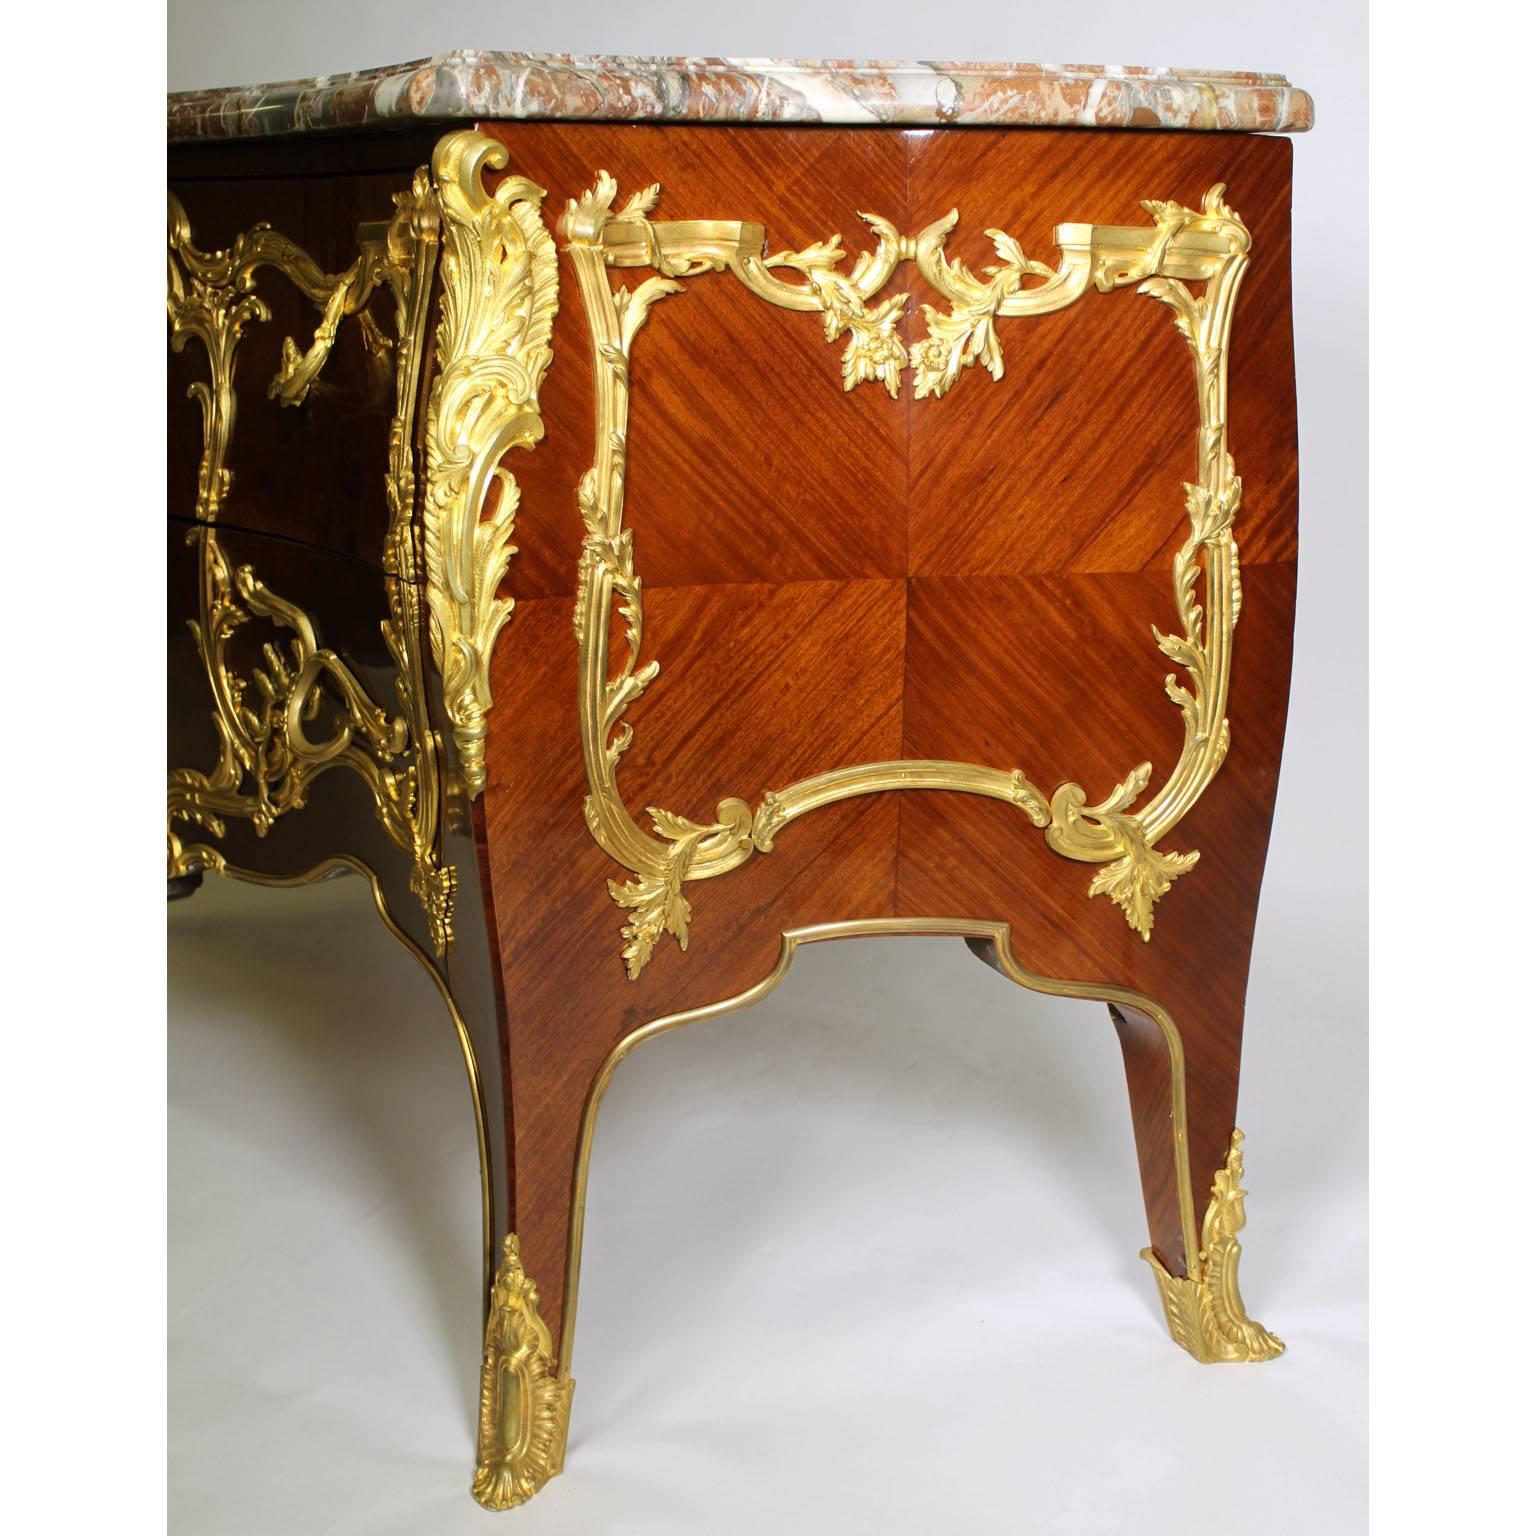 French 19th-20th century Louis XV Style Gilt Bronze Mounted Marquetry Commode For Sale 2